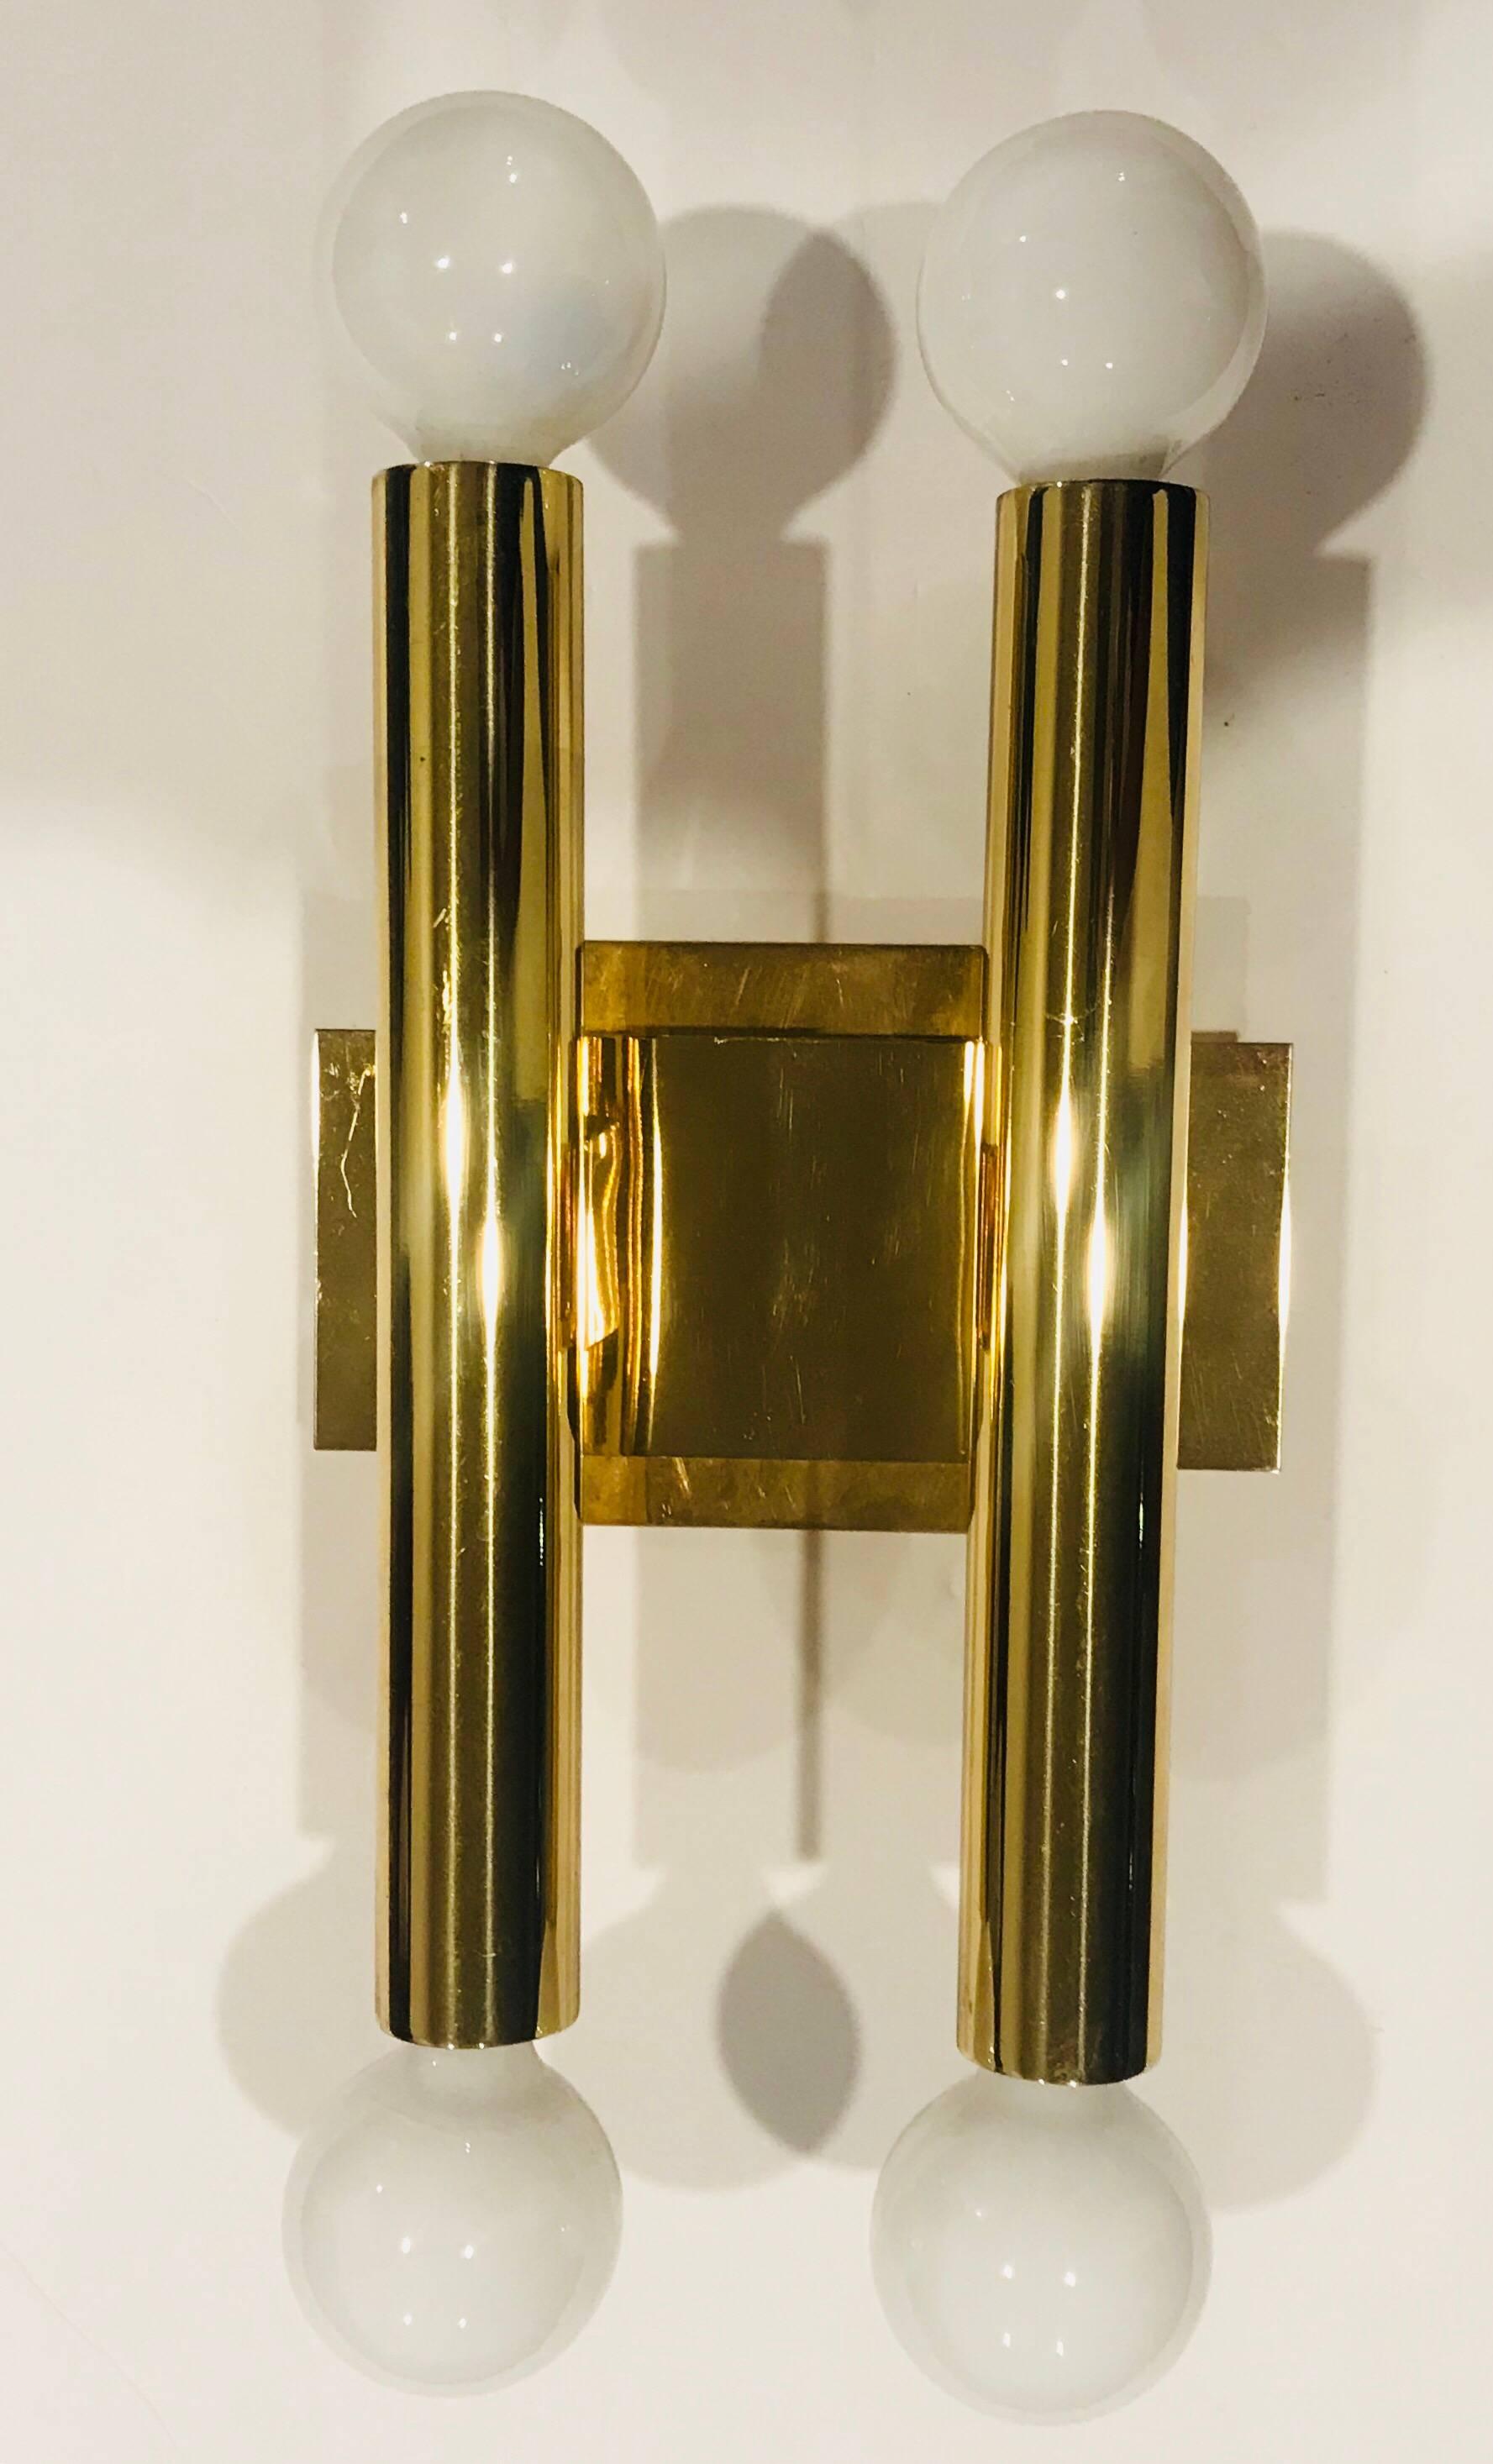 A pair of high polished golden brass modern tube sconces designed by the famed Italian lighting company, Sciolari. Four E12 candelabra 60w sockets each. Newly rewired with backplates.